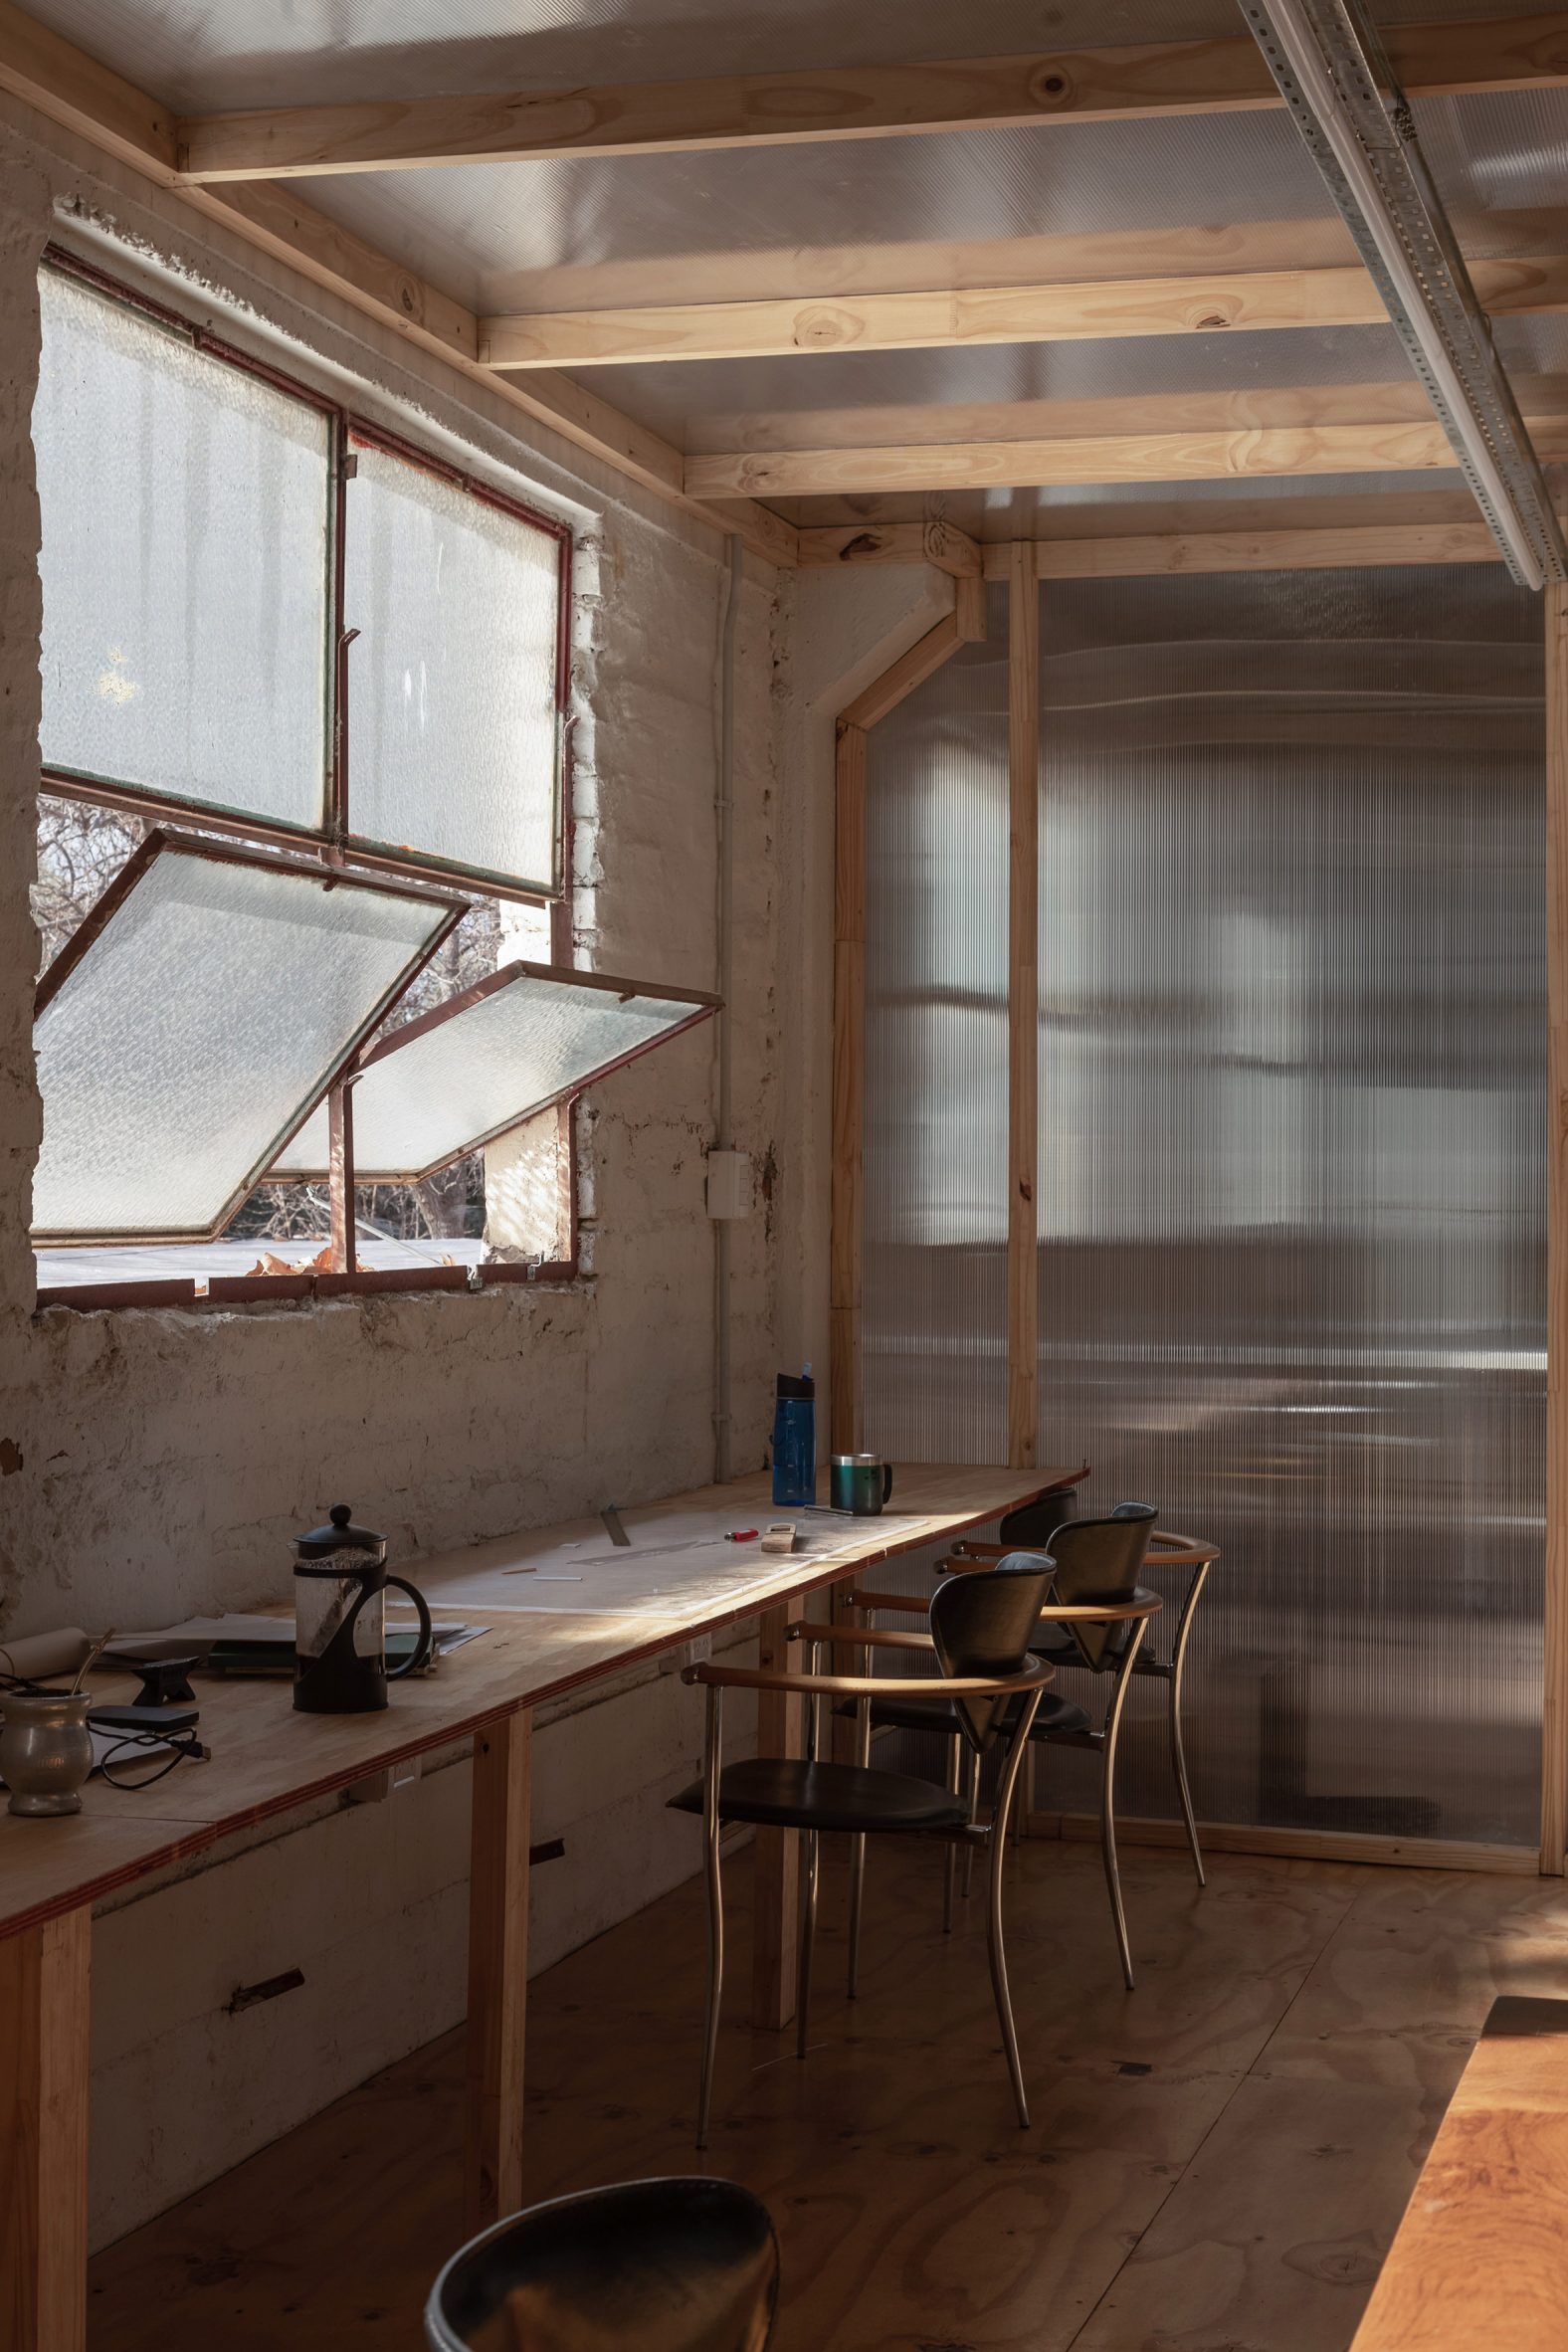 Polycarbonate walls and desks with windows in brick walls